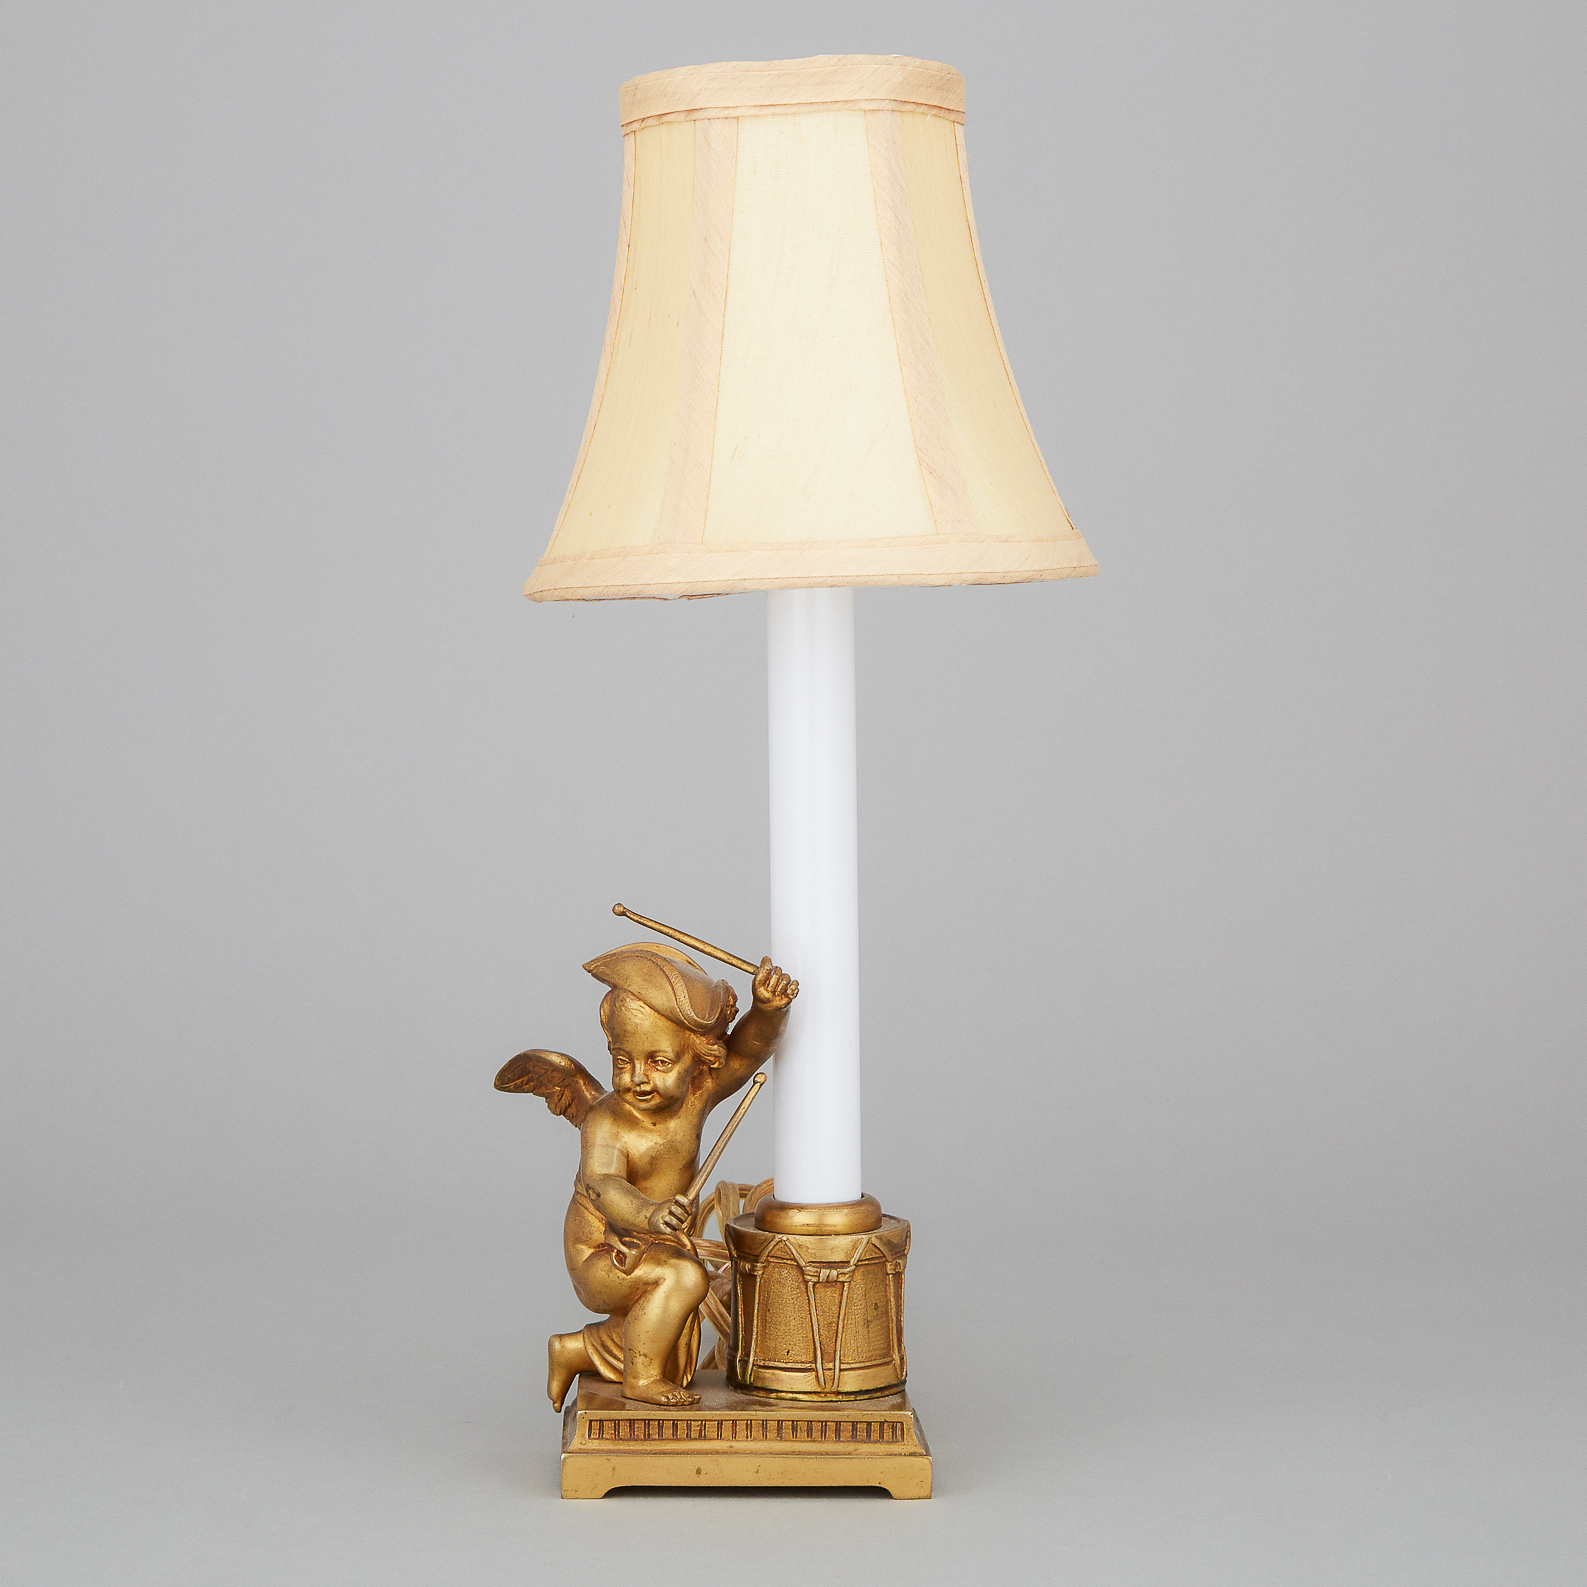 French Gilt Bronze Boudoir Lamp, early-mid 20th century